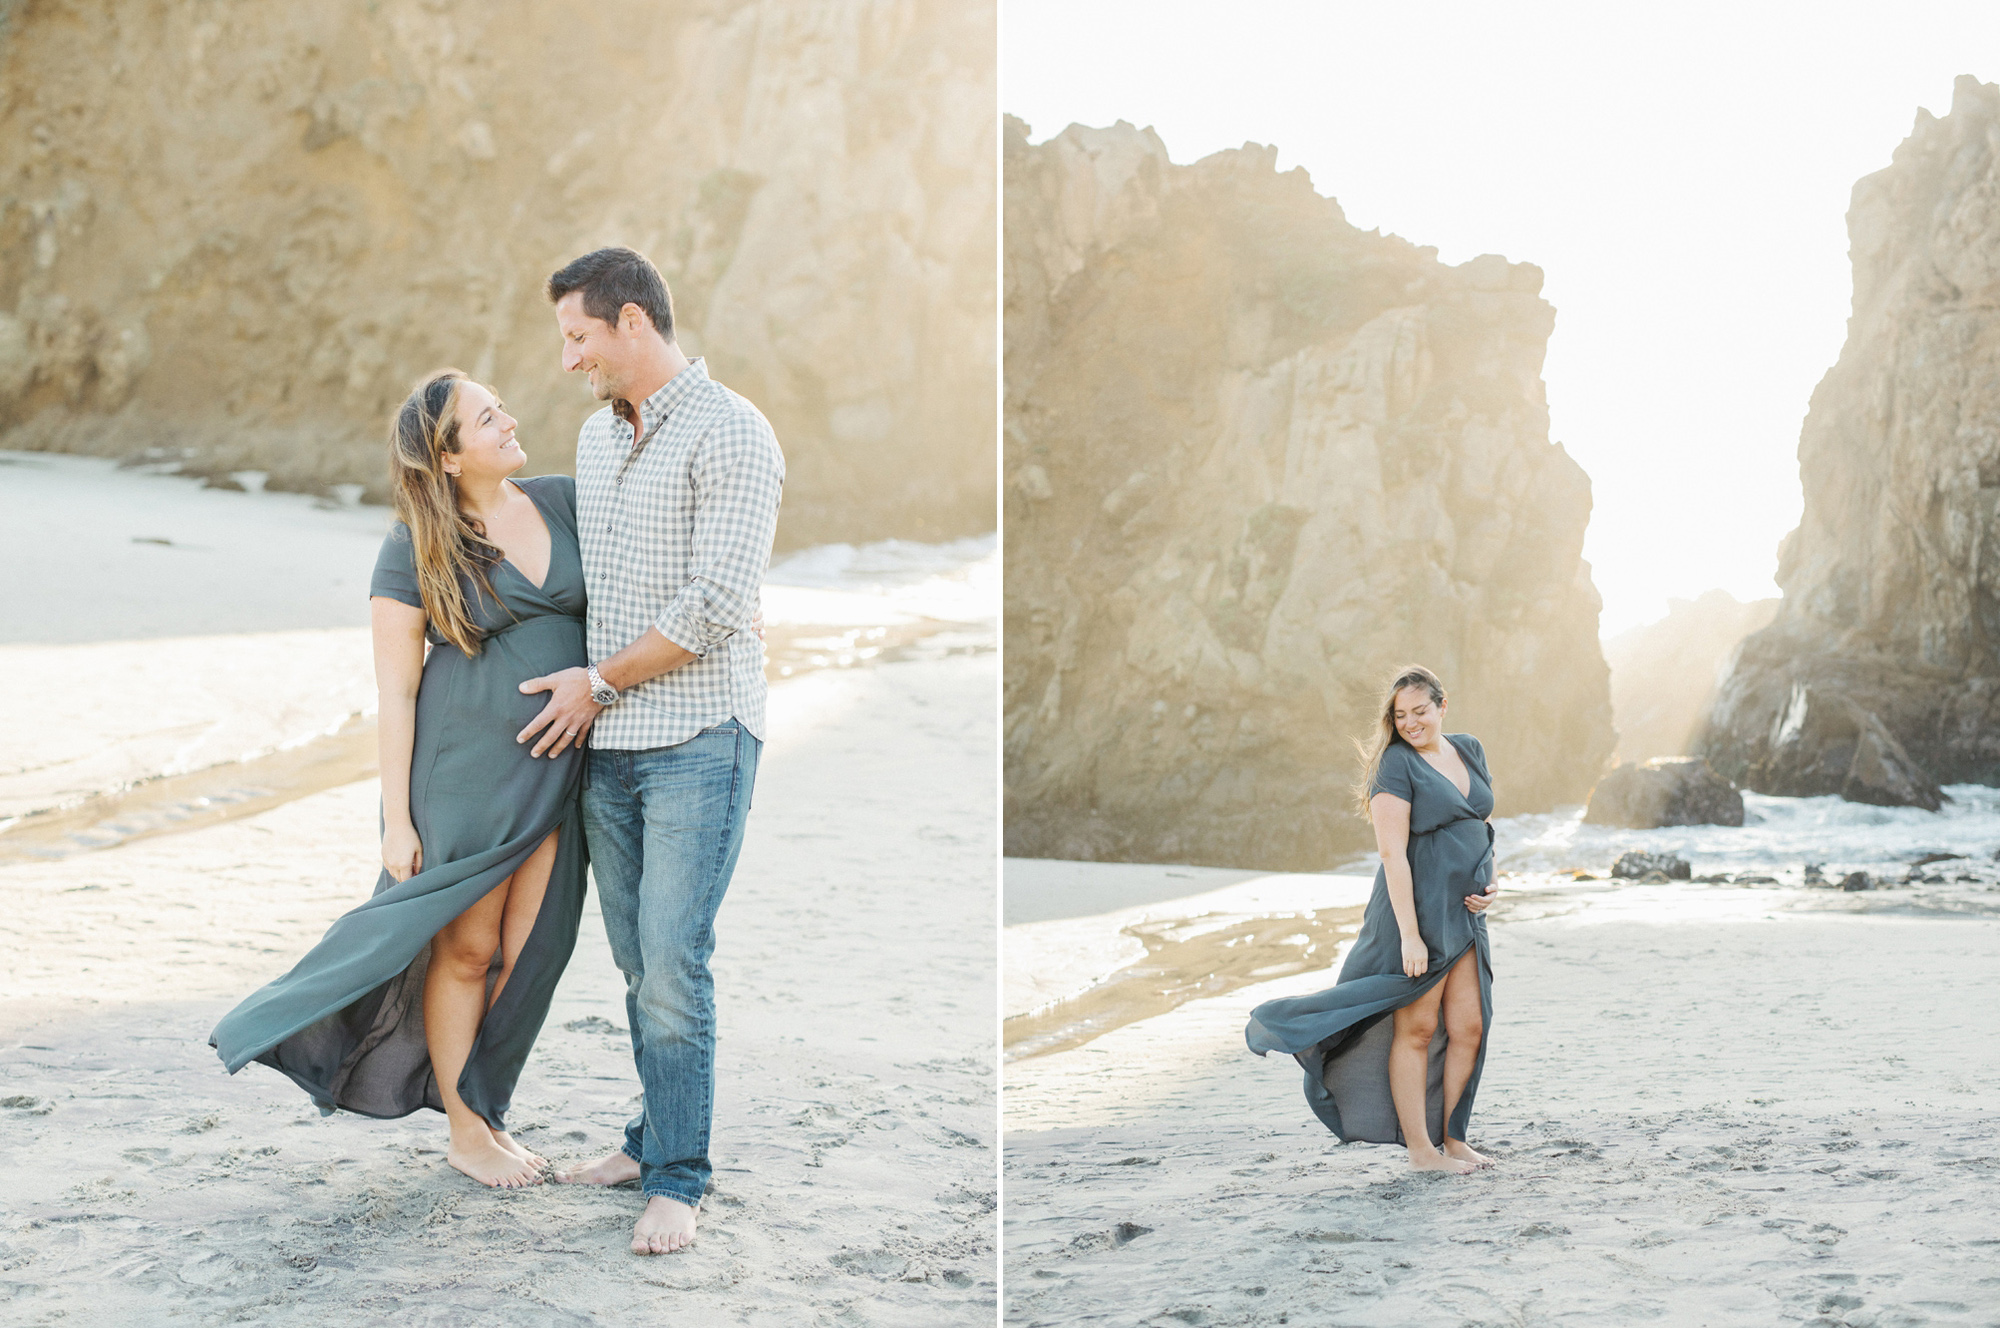 Pffeifer Beach maternity session captured on film with the Pentax 645n